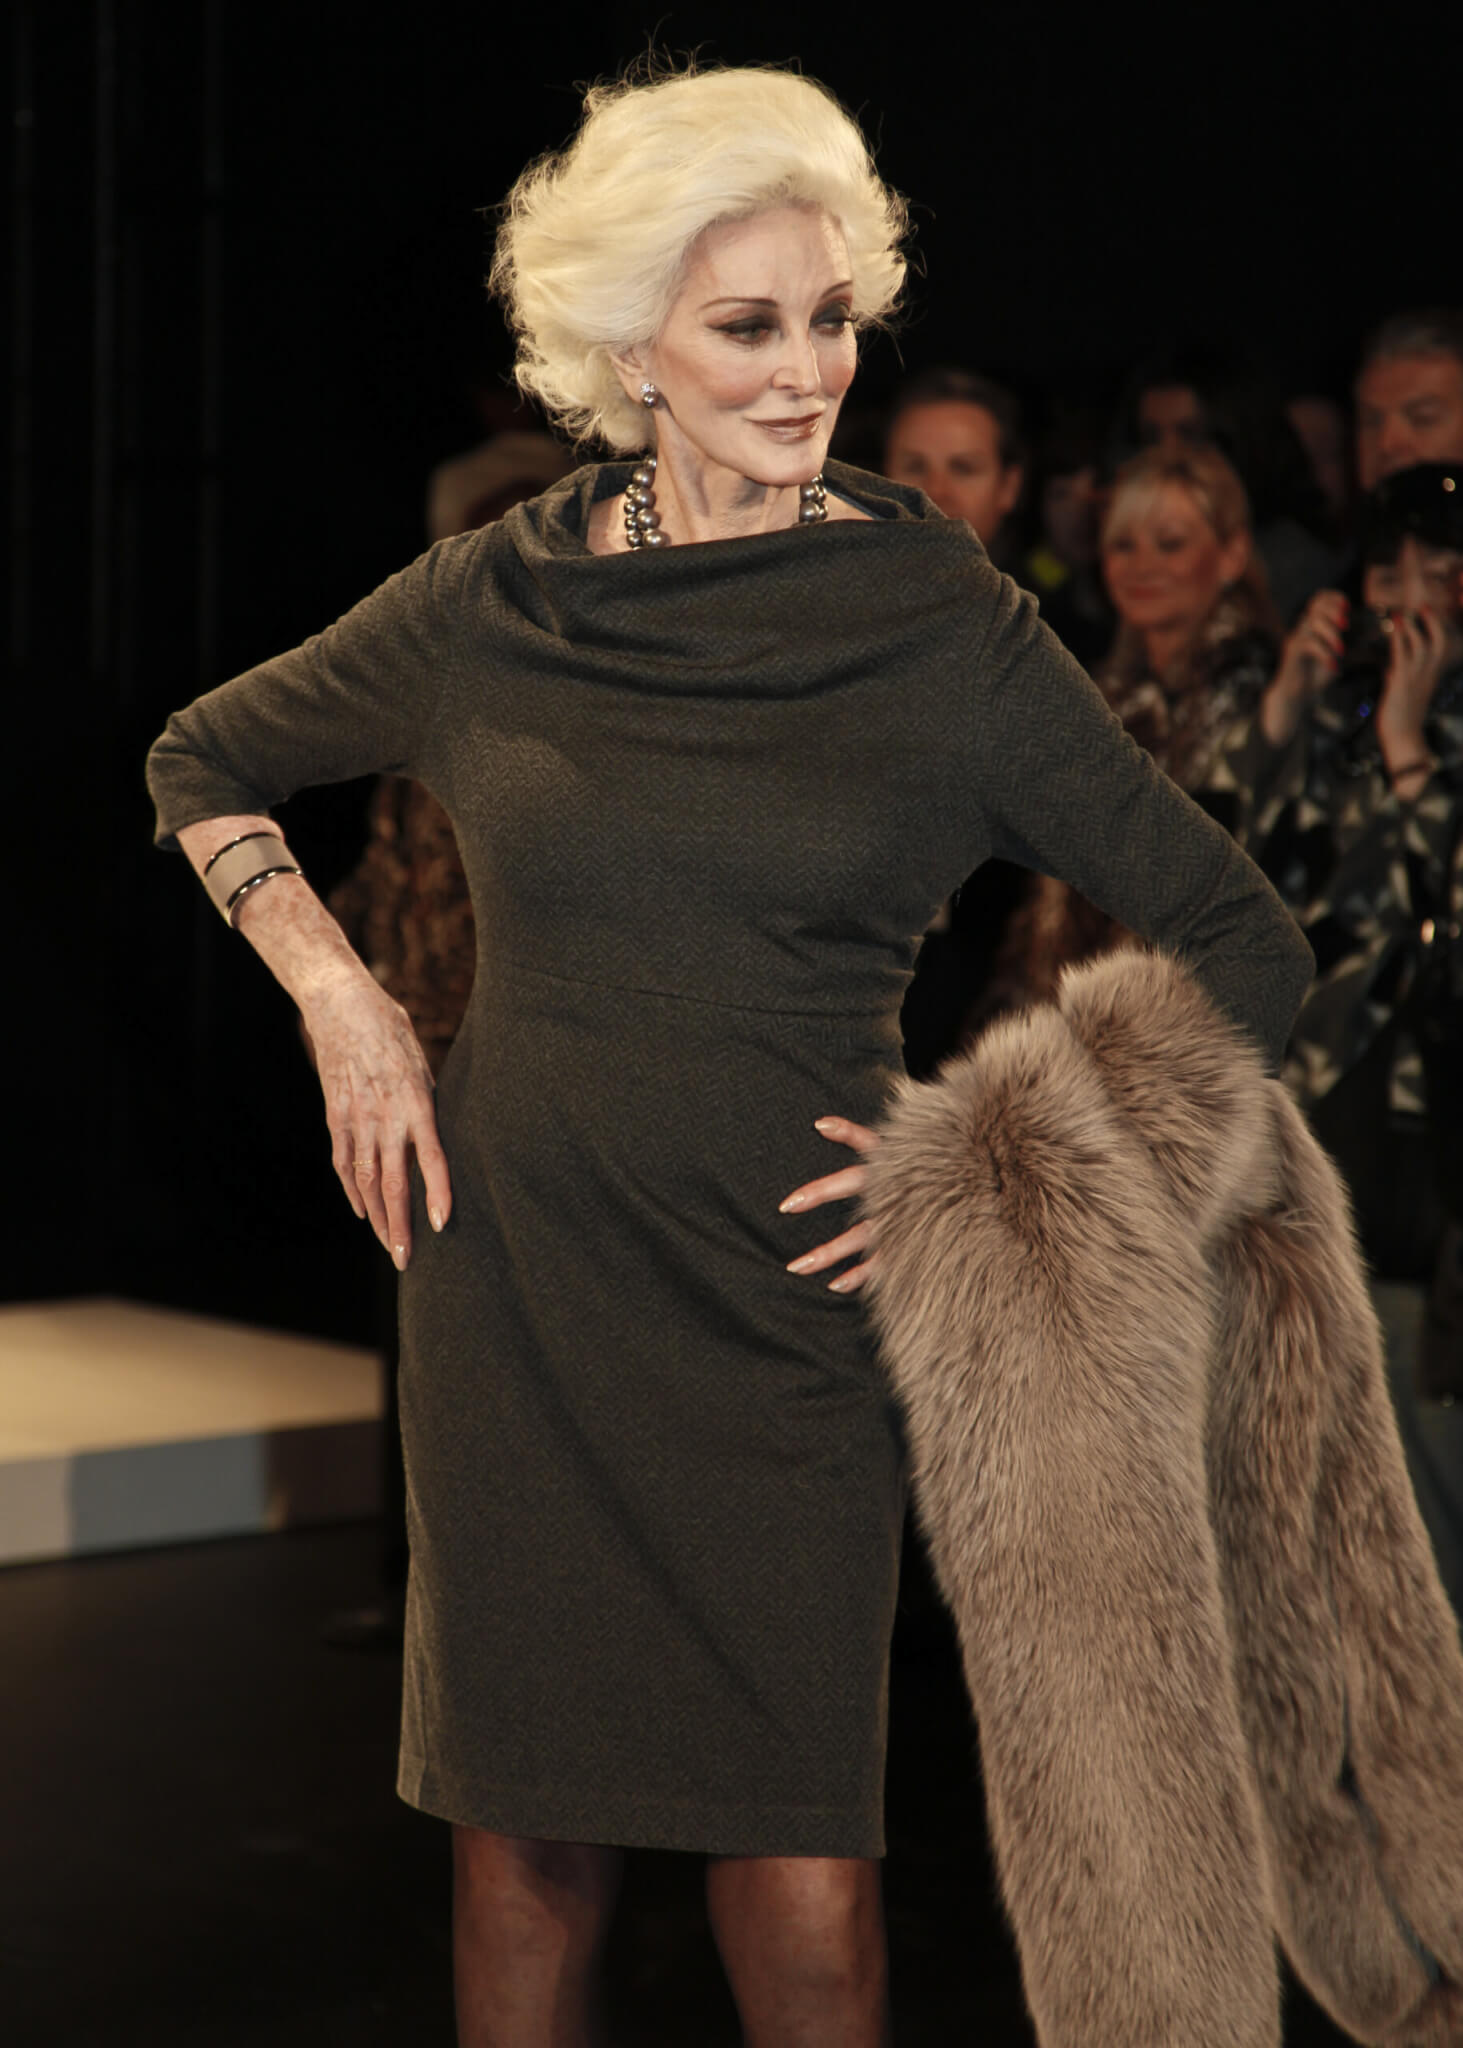  Model Carmen Dell Orefice walks the runway for collection by Adrienne Vittadini at Mercedes-Benz Fall/Winter 2011 Fashion Week